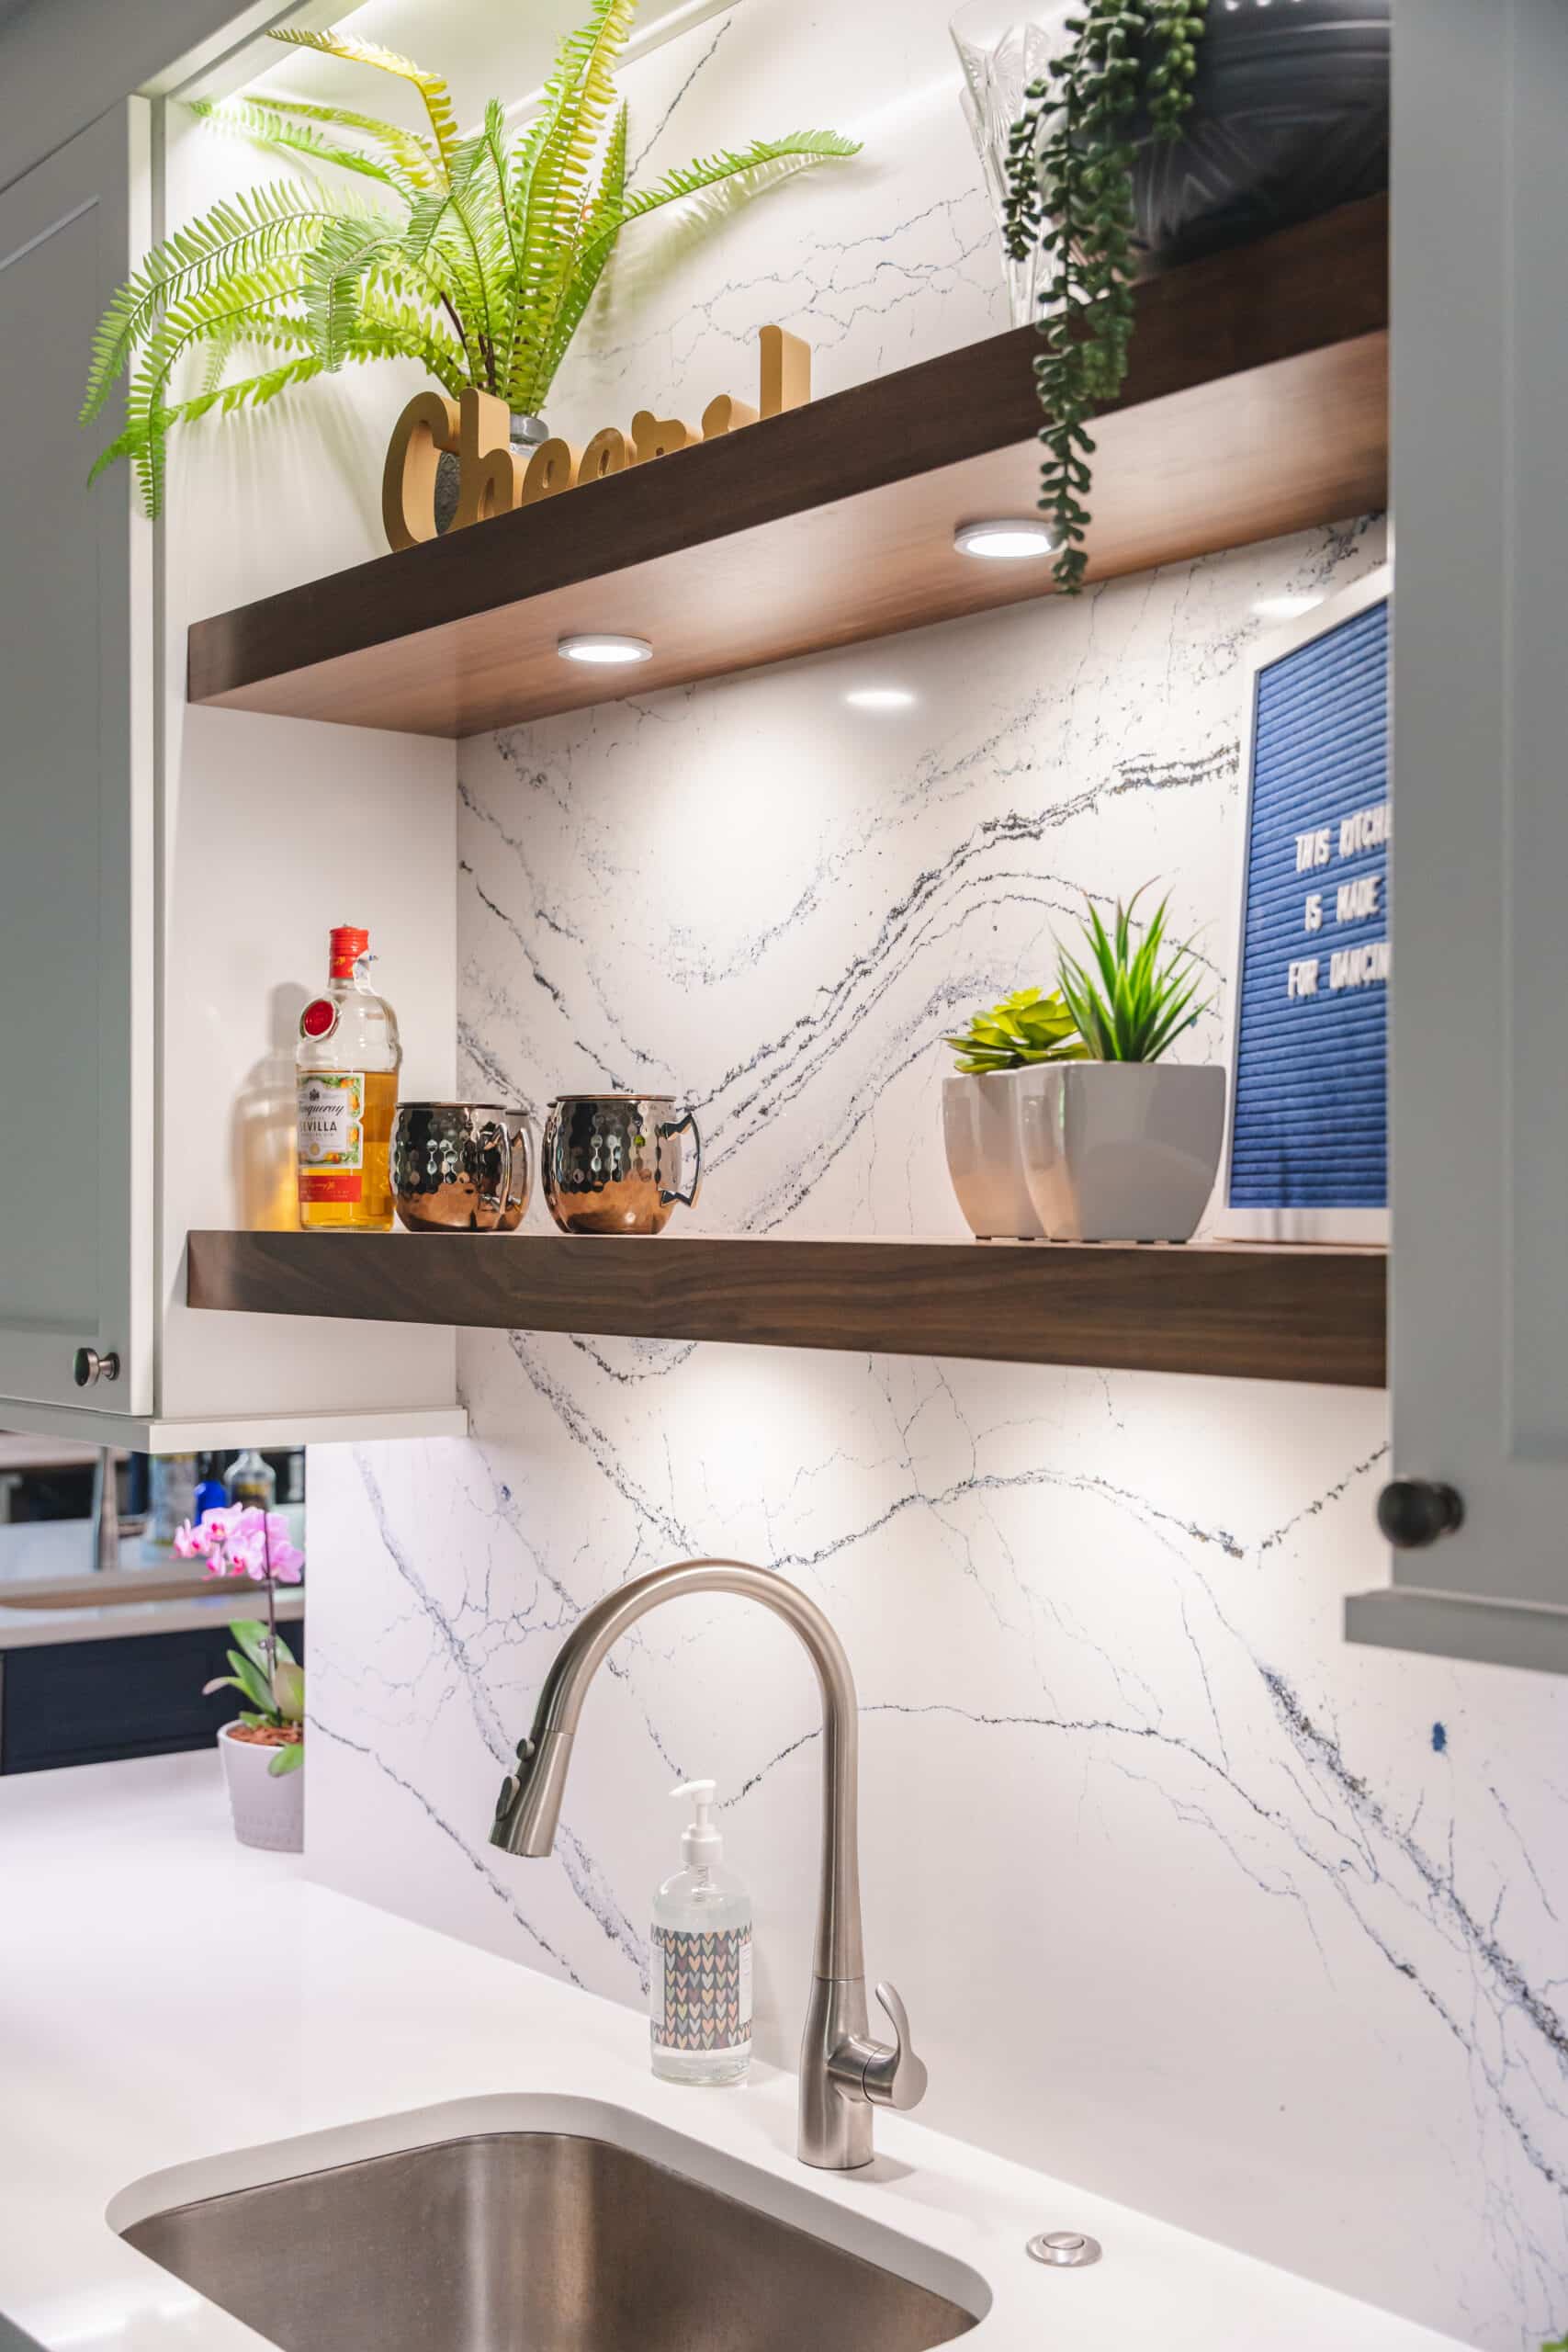 A functional kitchen sink with a shelf positioned above